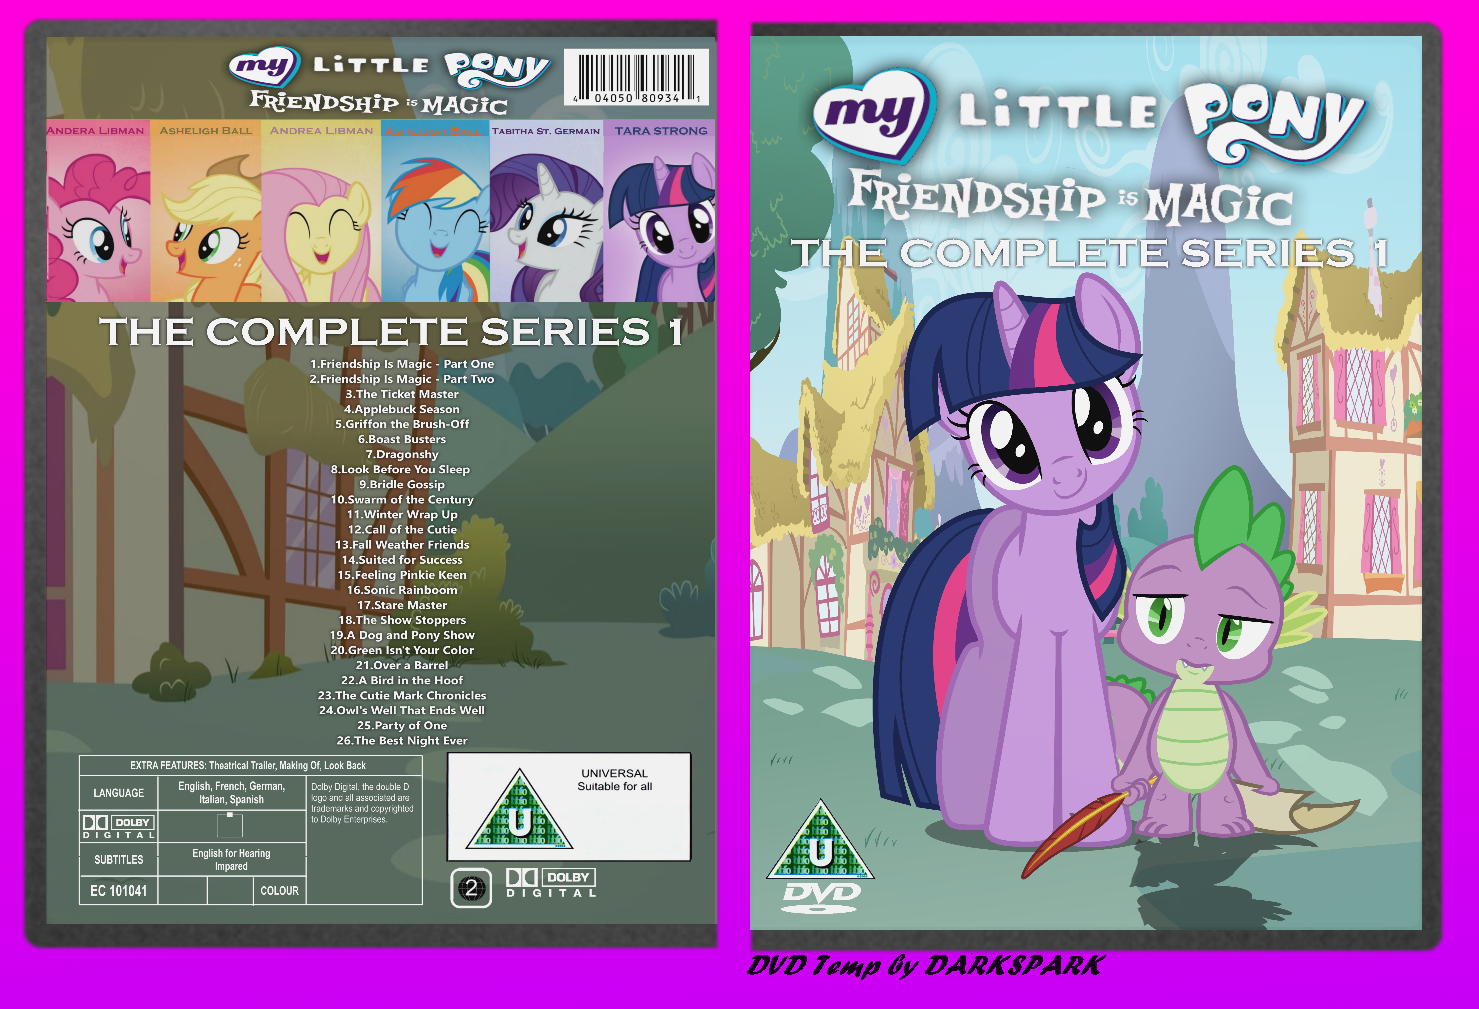 My Little Pony: Friendship is Magic: Series 1 box cover